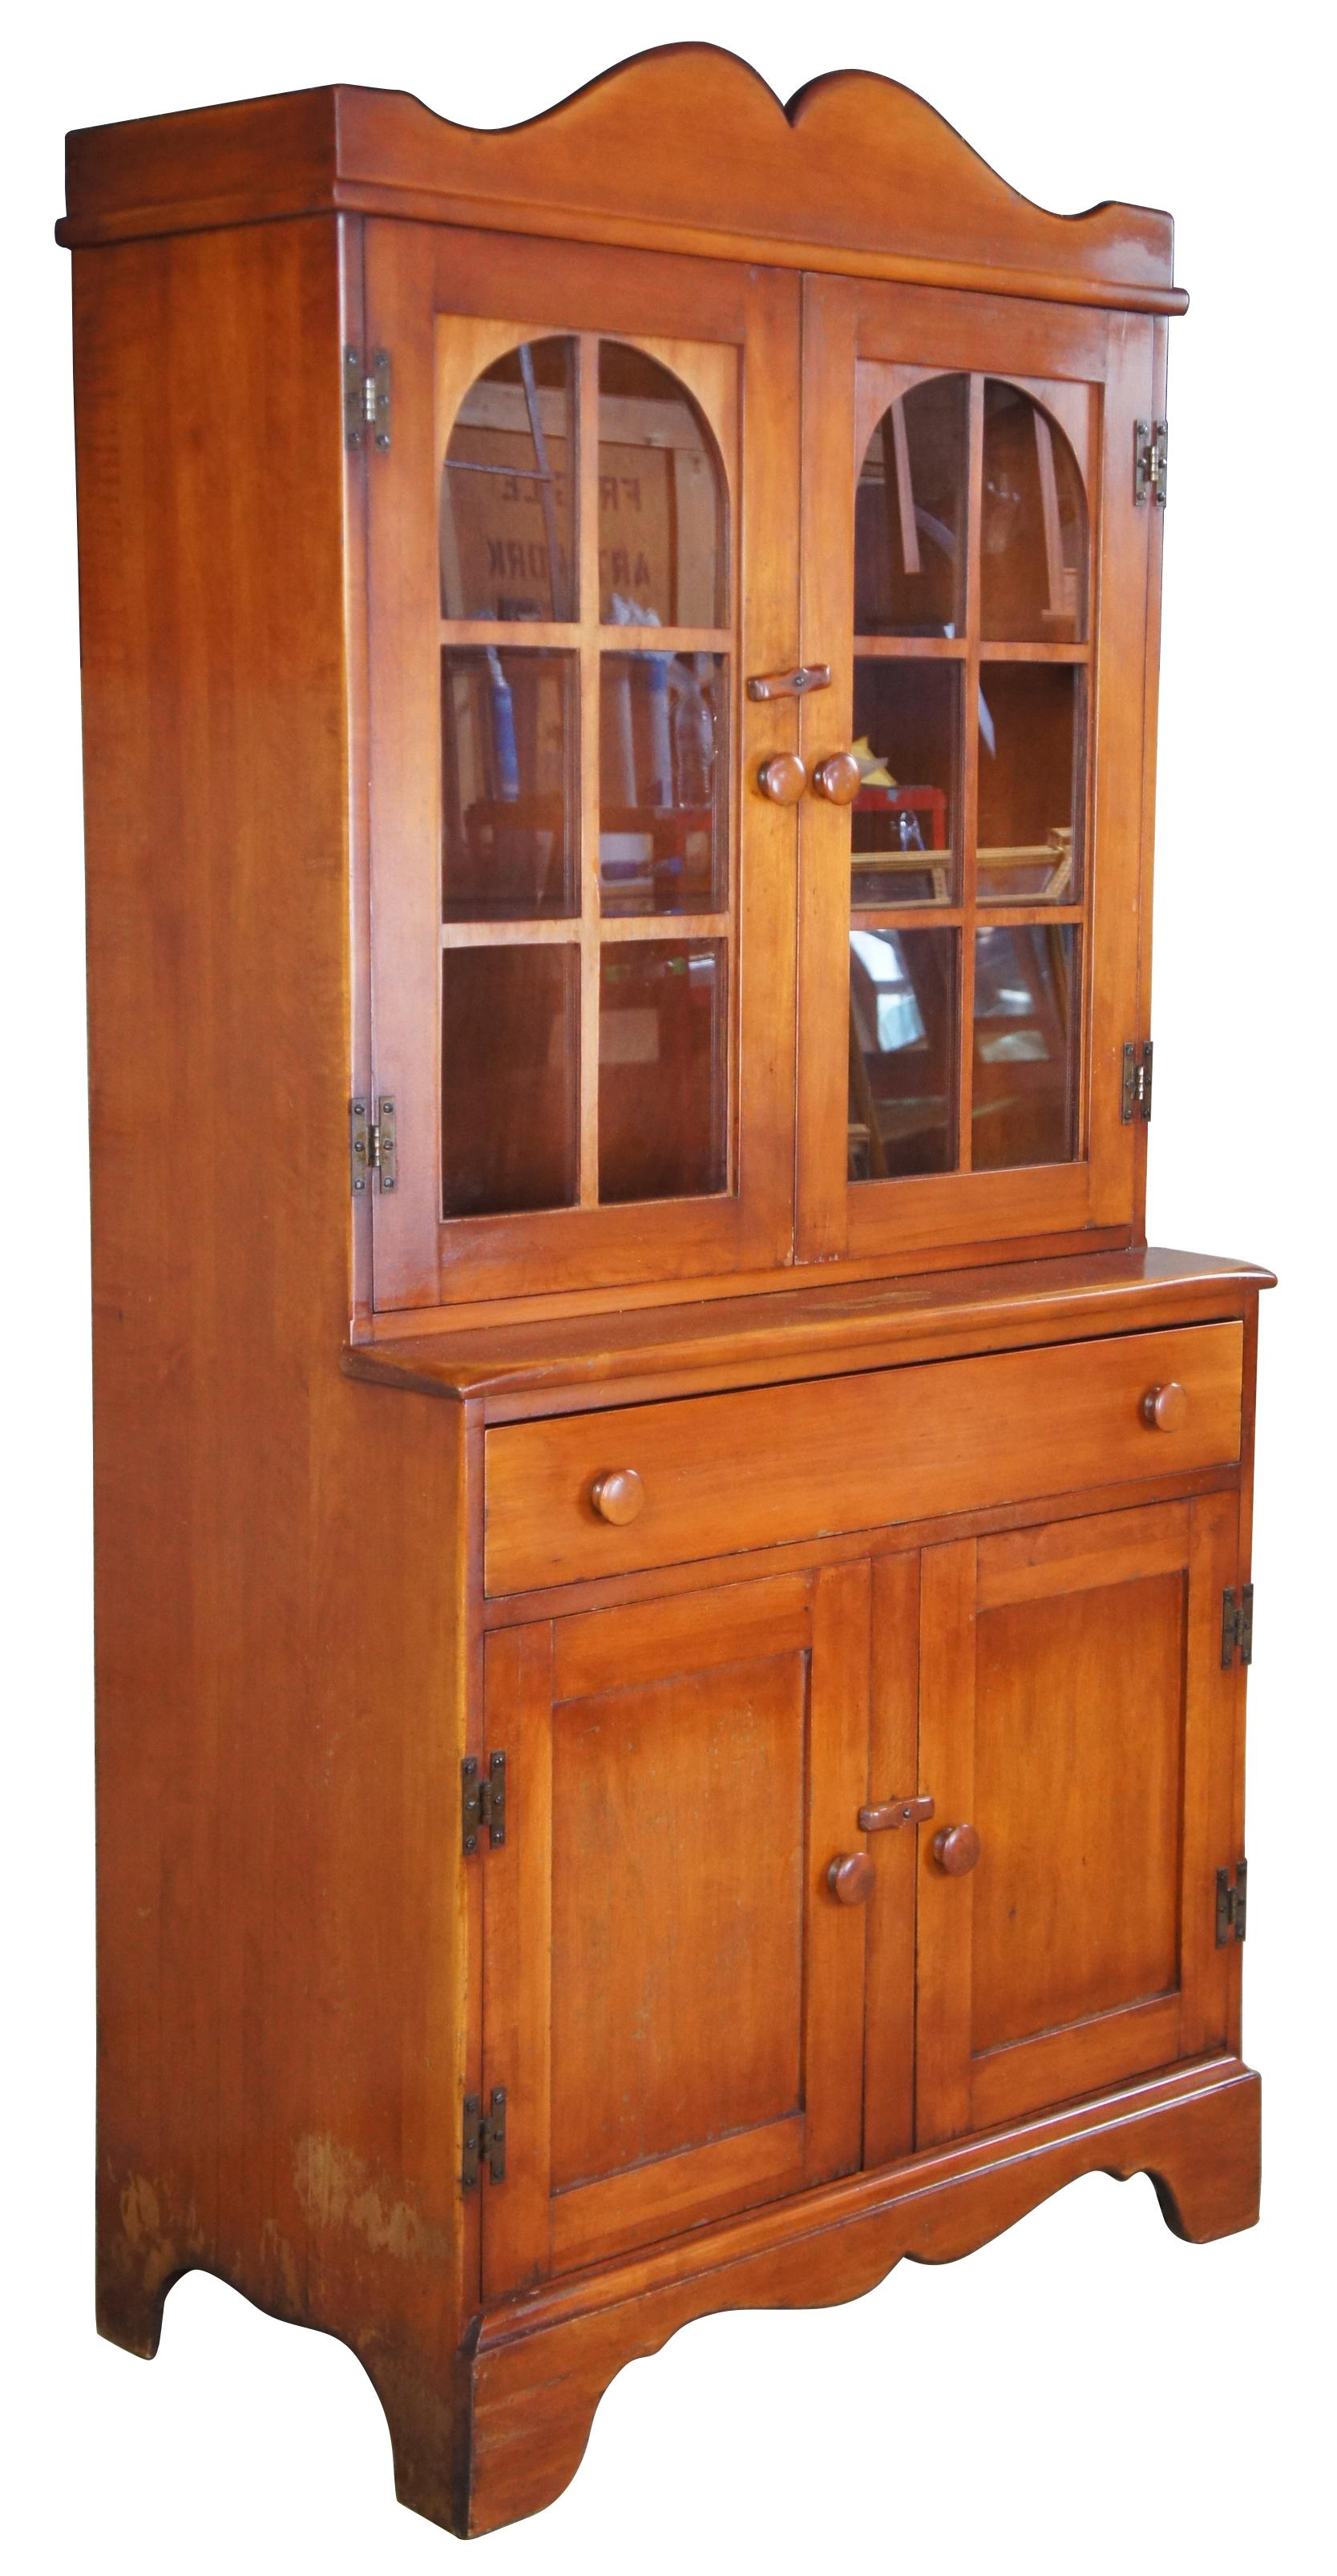 Consider H. Willett No. 1967 China Hutch, Circa 1930s, as seen in their 1939 catalogue. An Early American Reproduction in Wild Cherry. Features 2 upper shelves behind paneled doors, a central drawer and lower cabinet for storage. Consider H wIllett